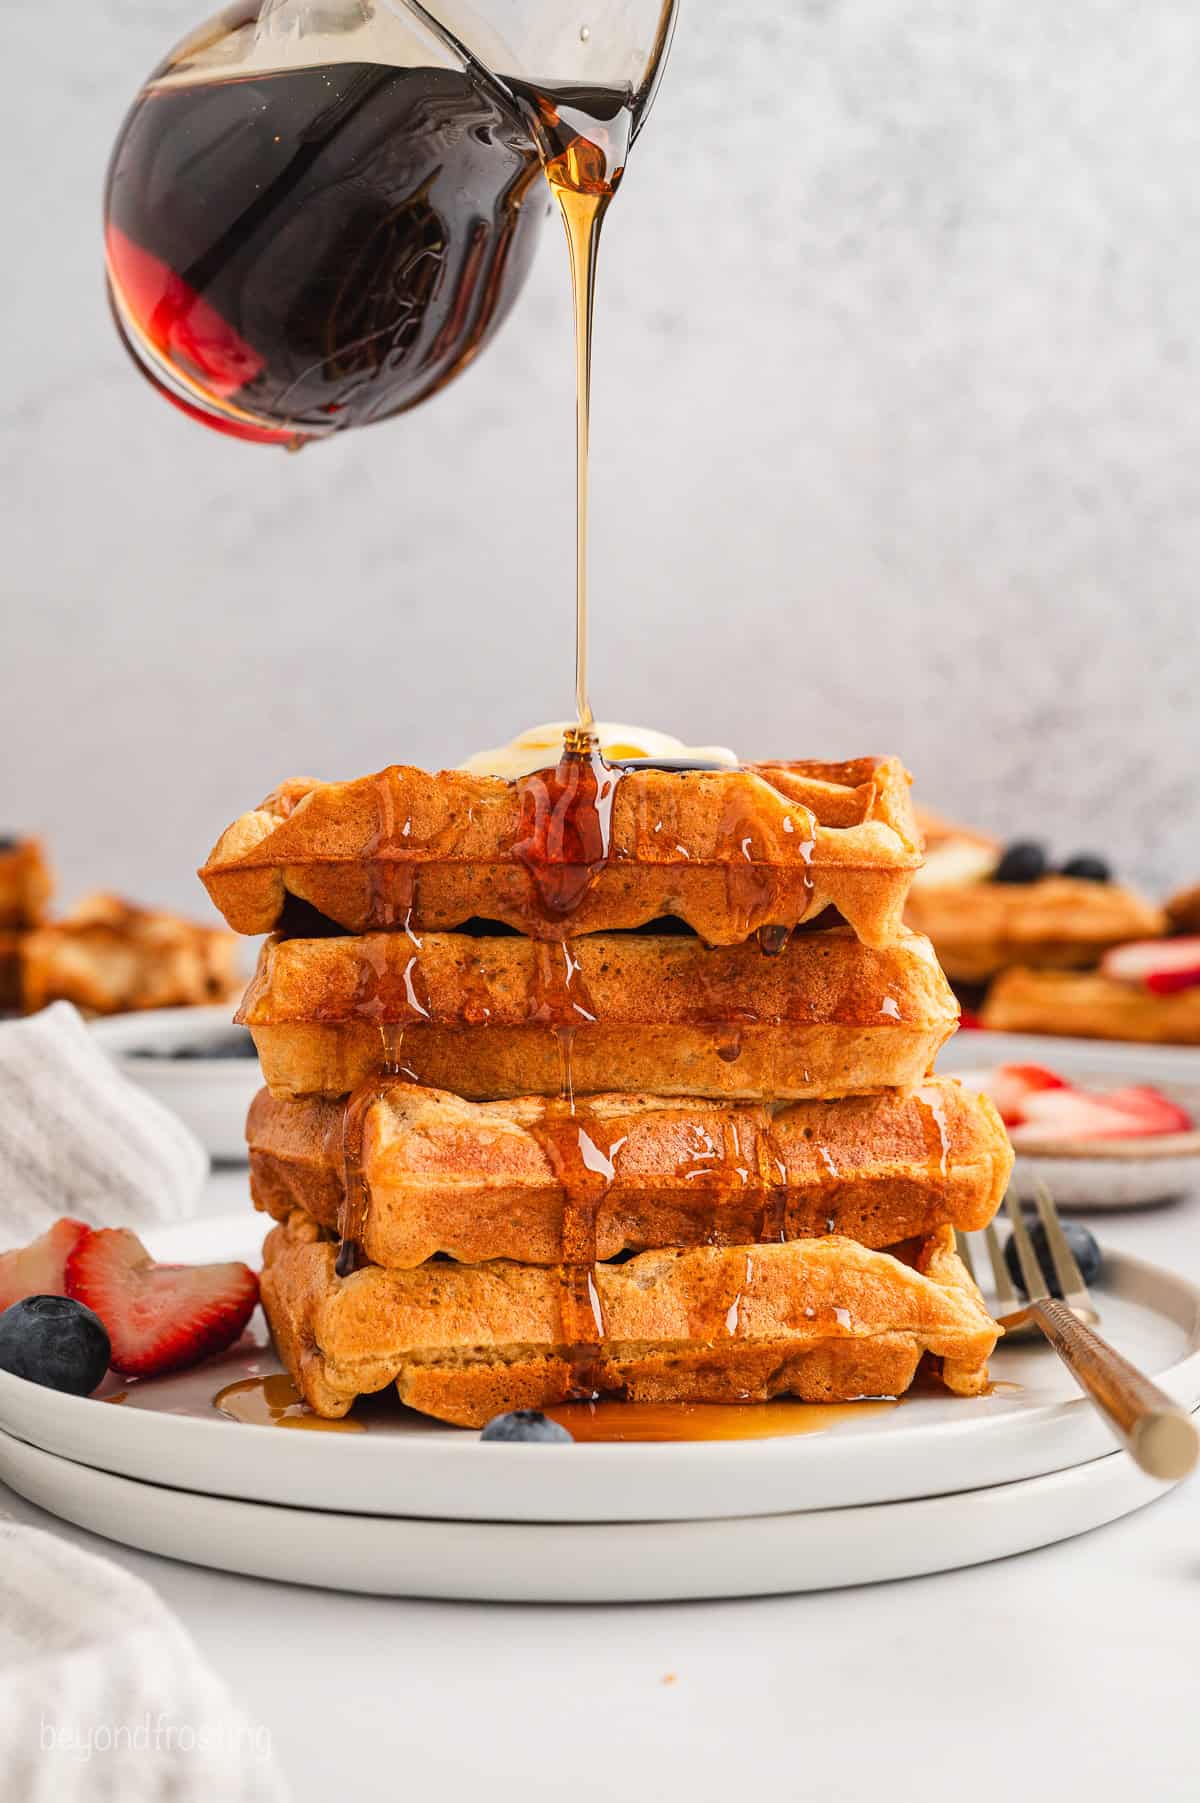 Maple syrup is drizzled from a jug over top of a stack of buttermilk waffles on a plate.